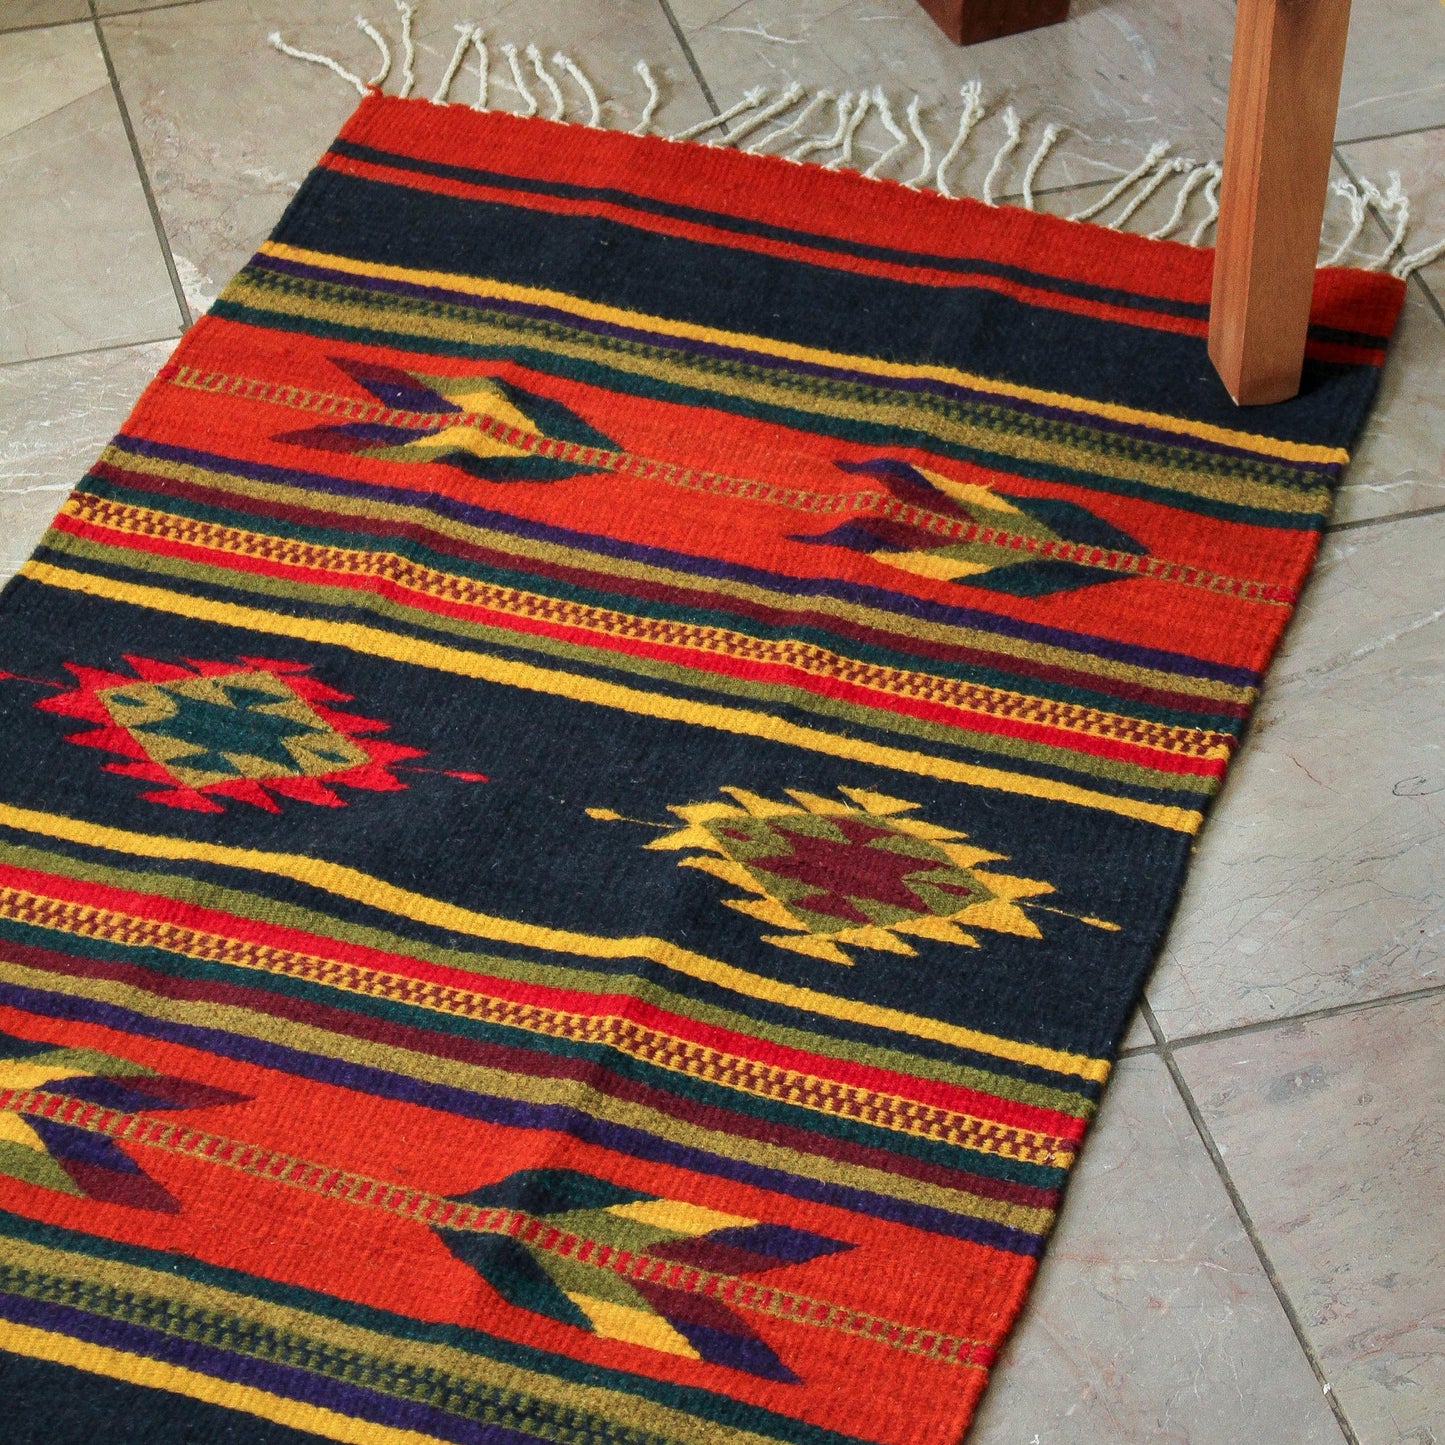 Swift Arrows Unique Geometric Wool Area Rug from Mexico (2x3)